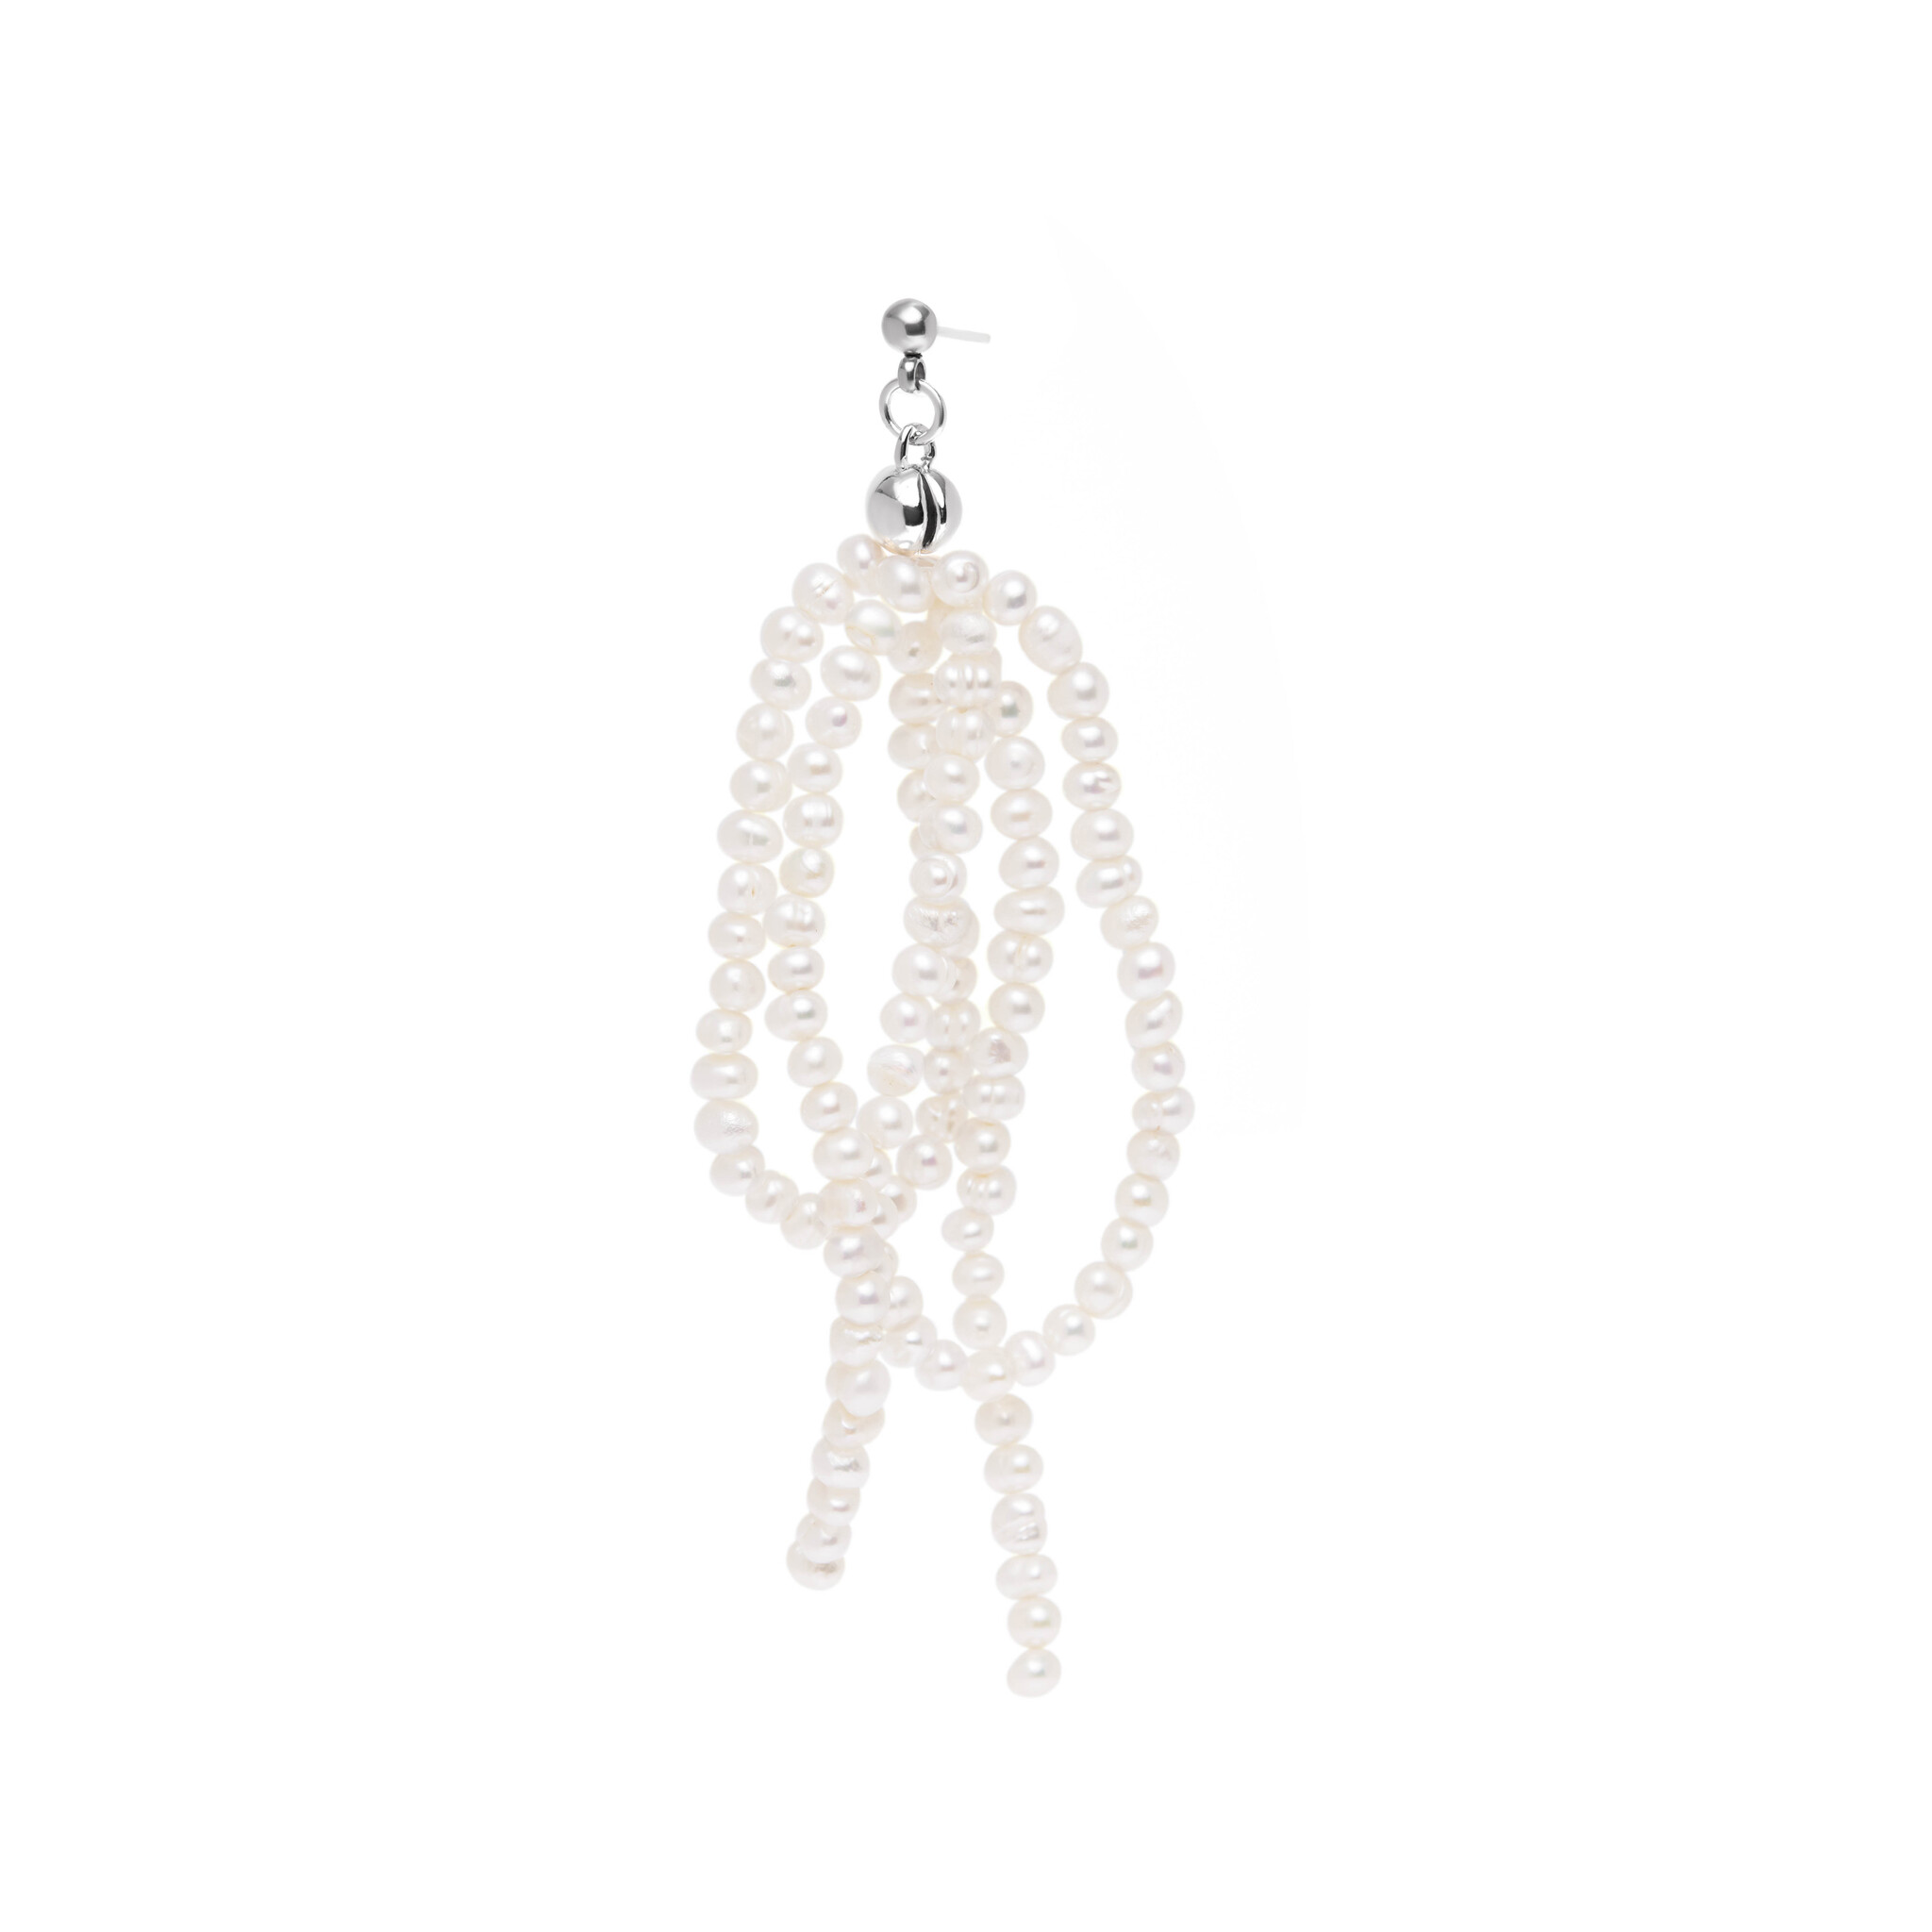 HOLLY JUNE Серьга Pearly Mess Earring holly june брошь pearly pin brooch